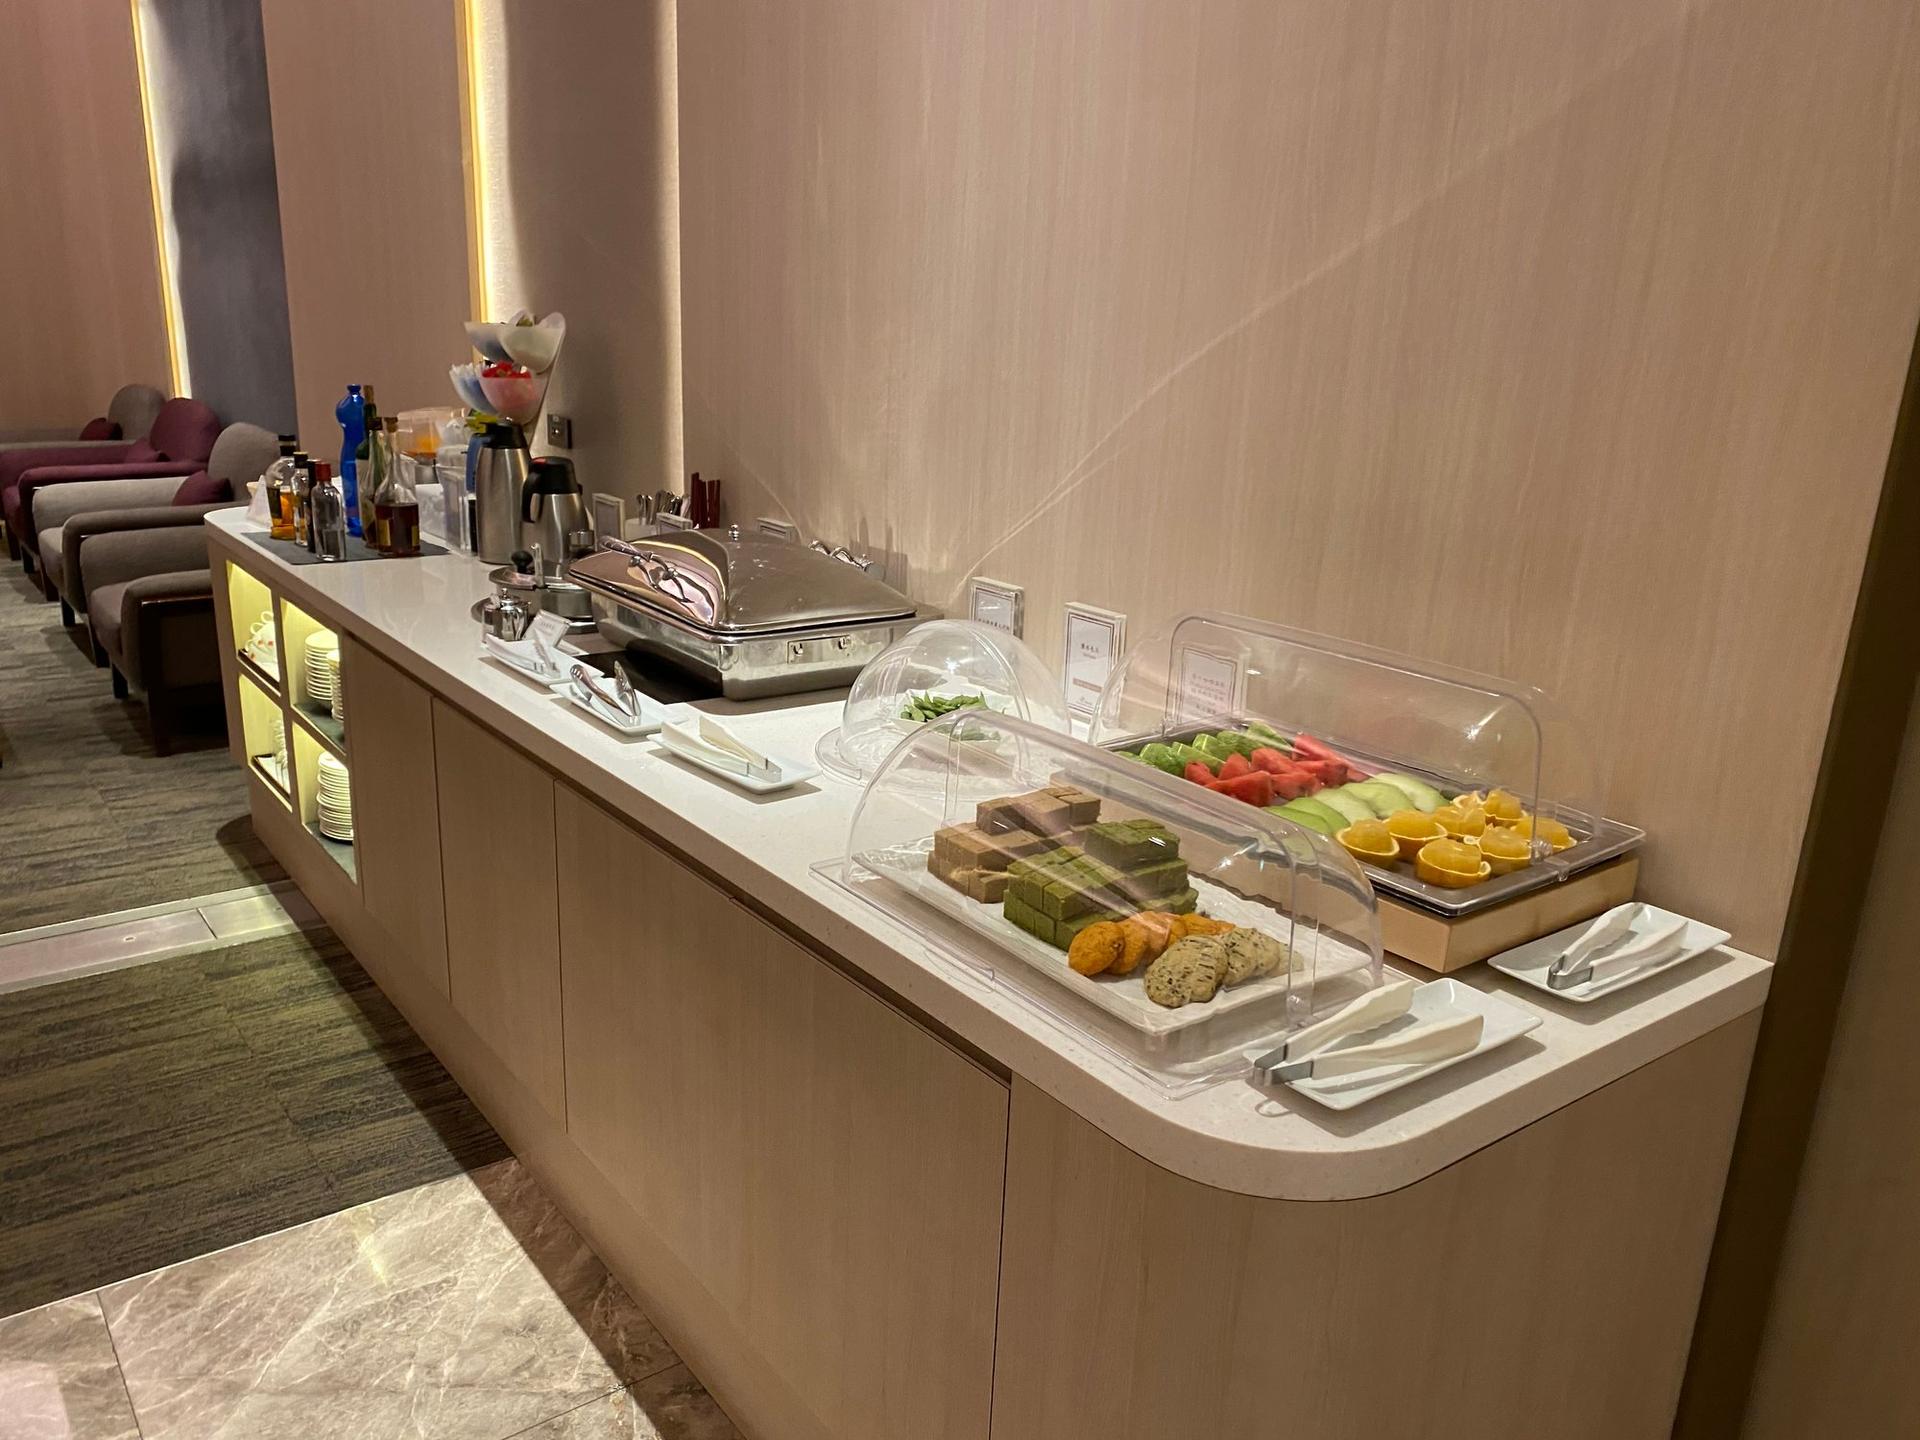 China Airlines Lounge (V2) image 8 of 20